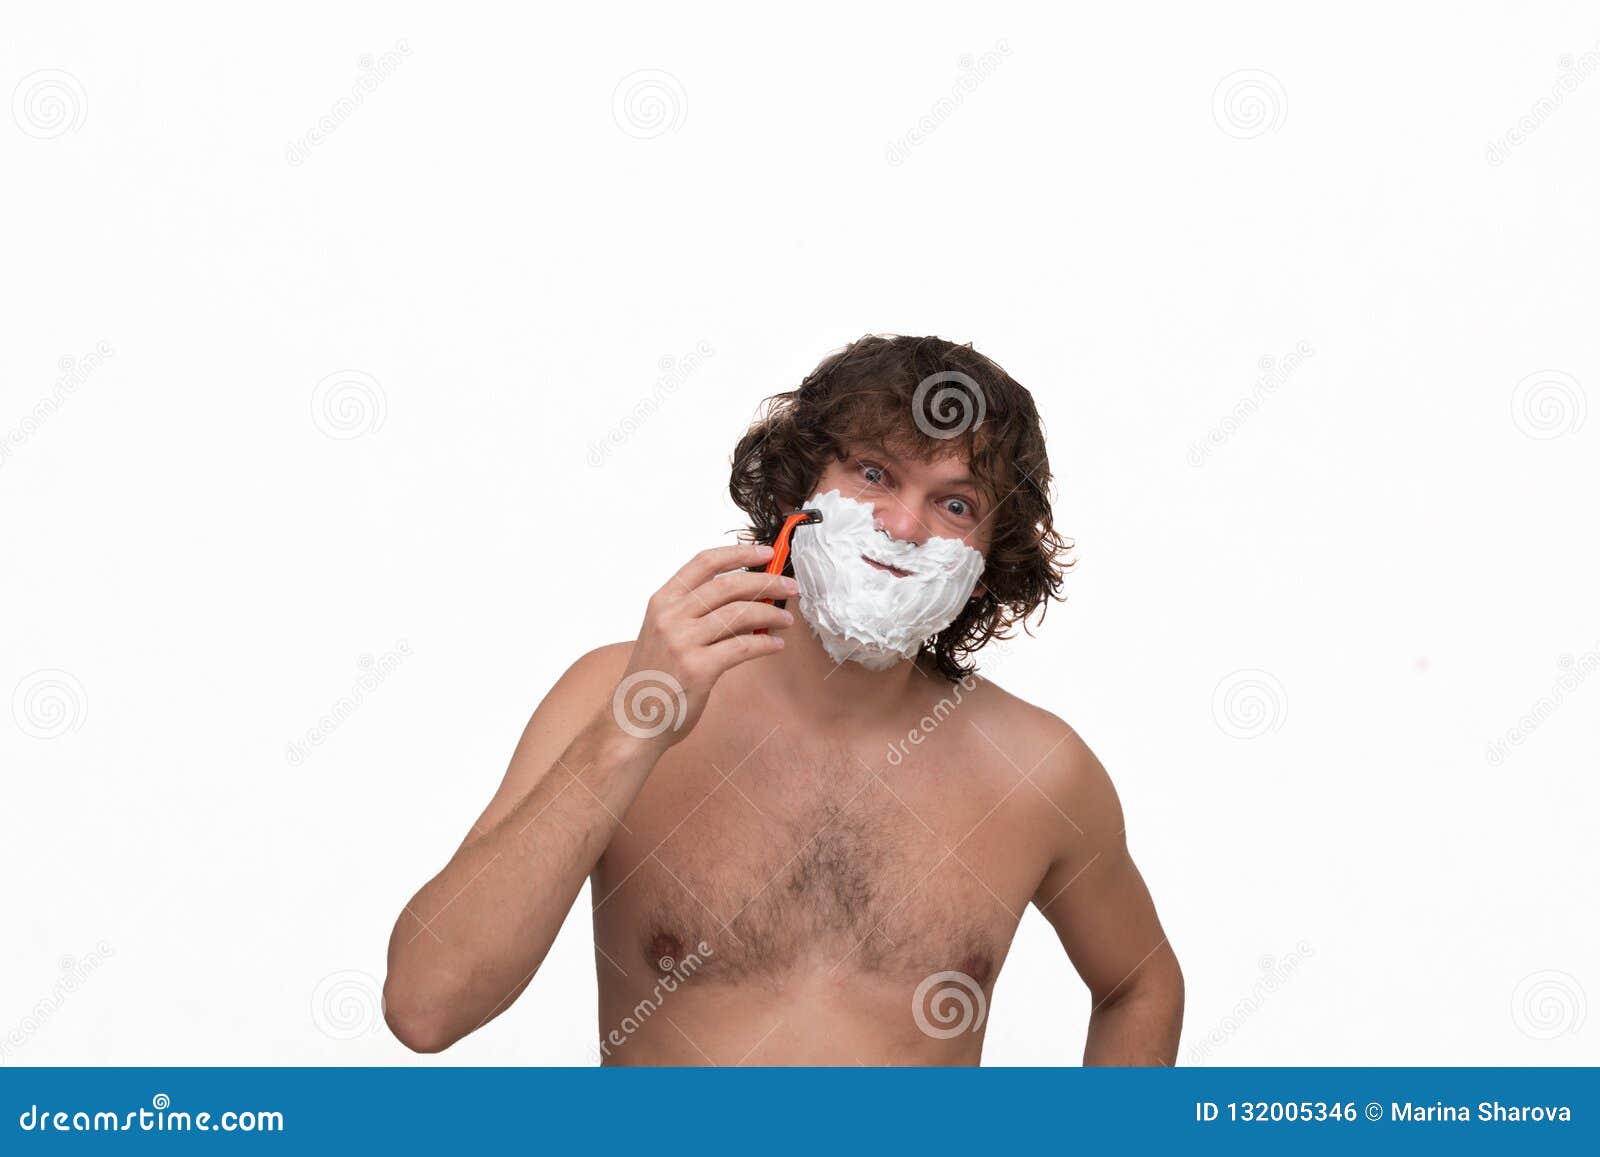 Handsome Man with Dark Wet Curly Hair Shaving His Beard with a Razor  Isolated on White. Close Up Portrait of a Man Distorts the Stock Photo -  Image of body, male: 132005346